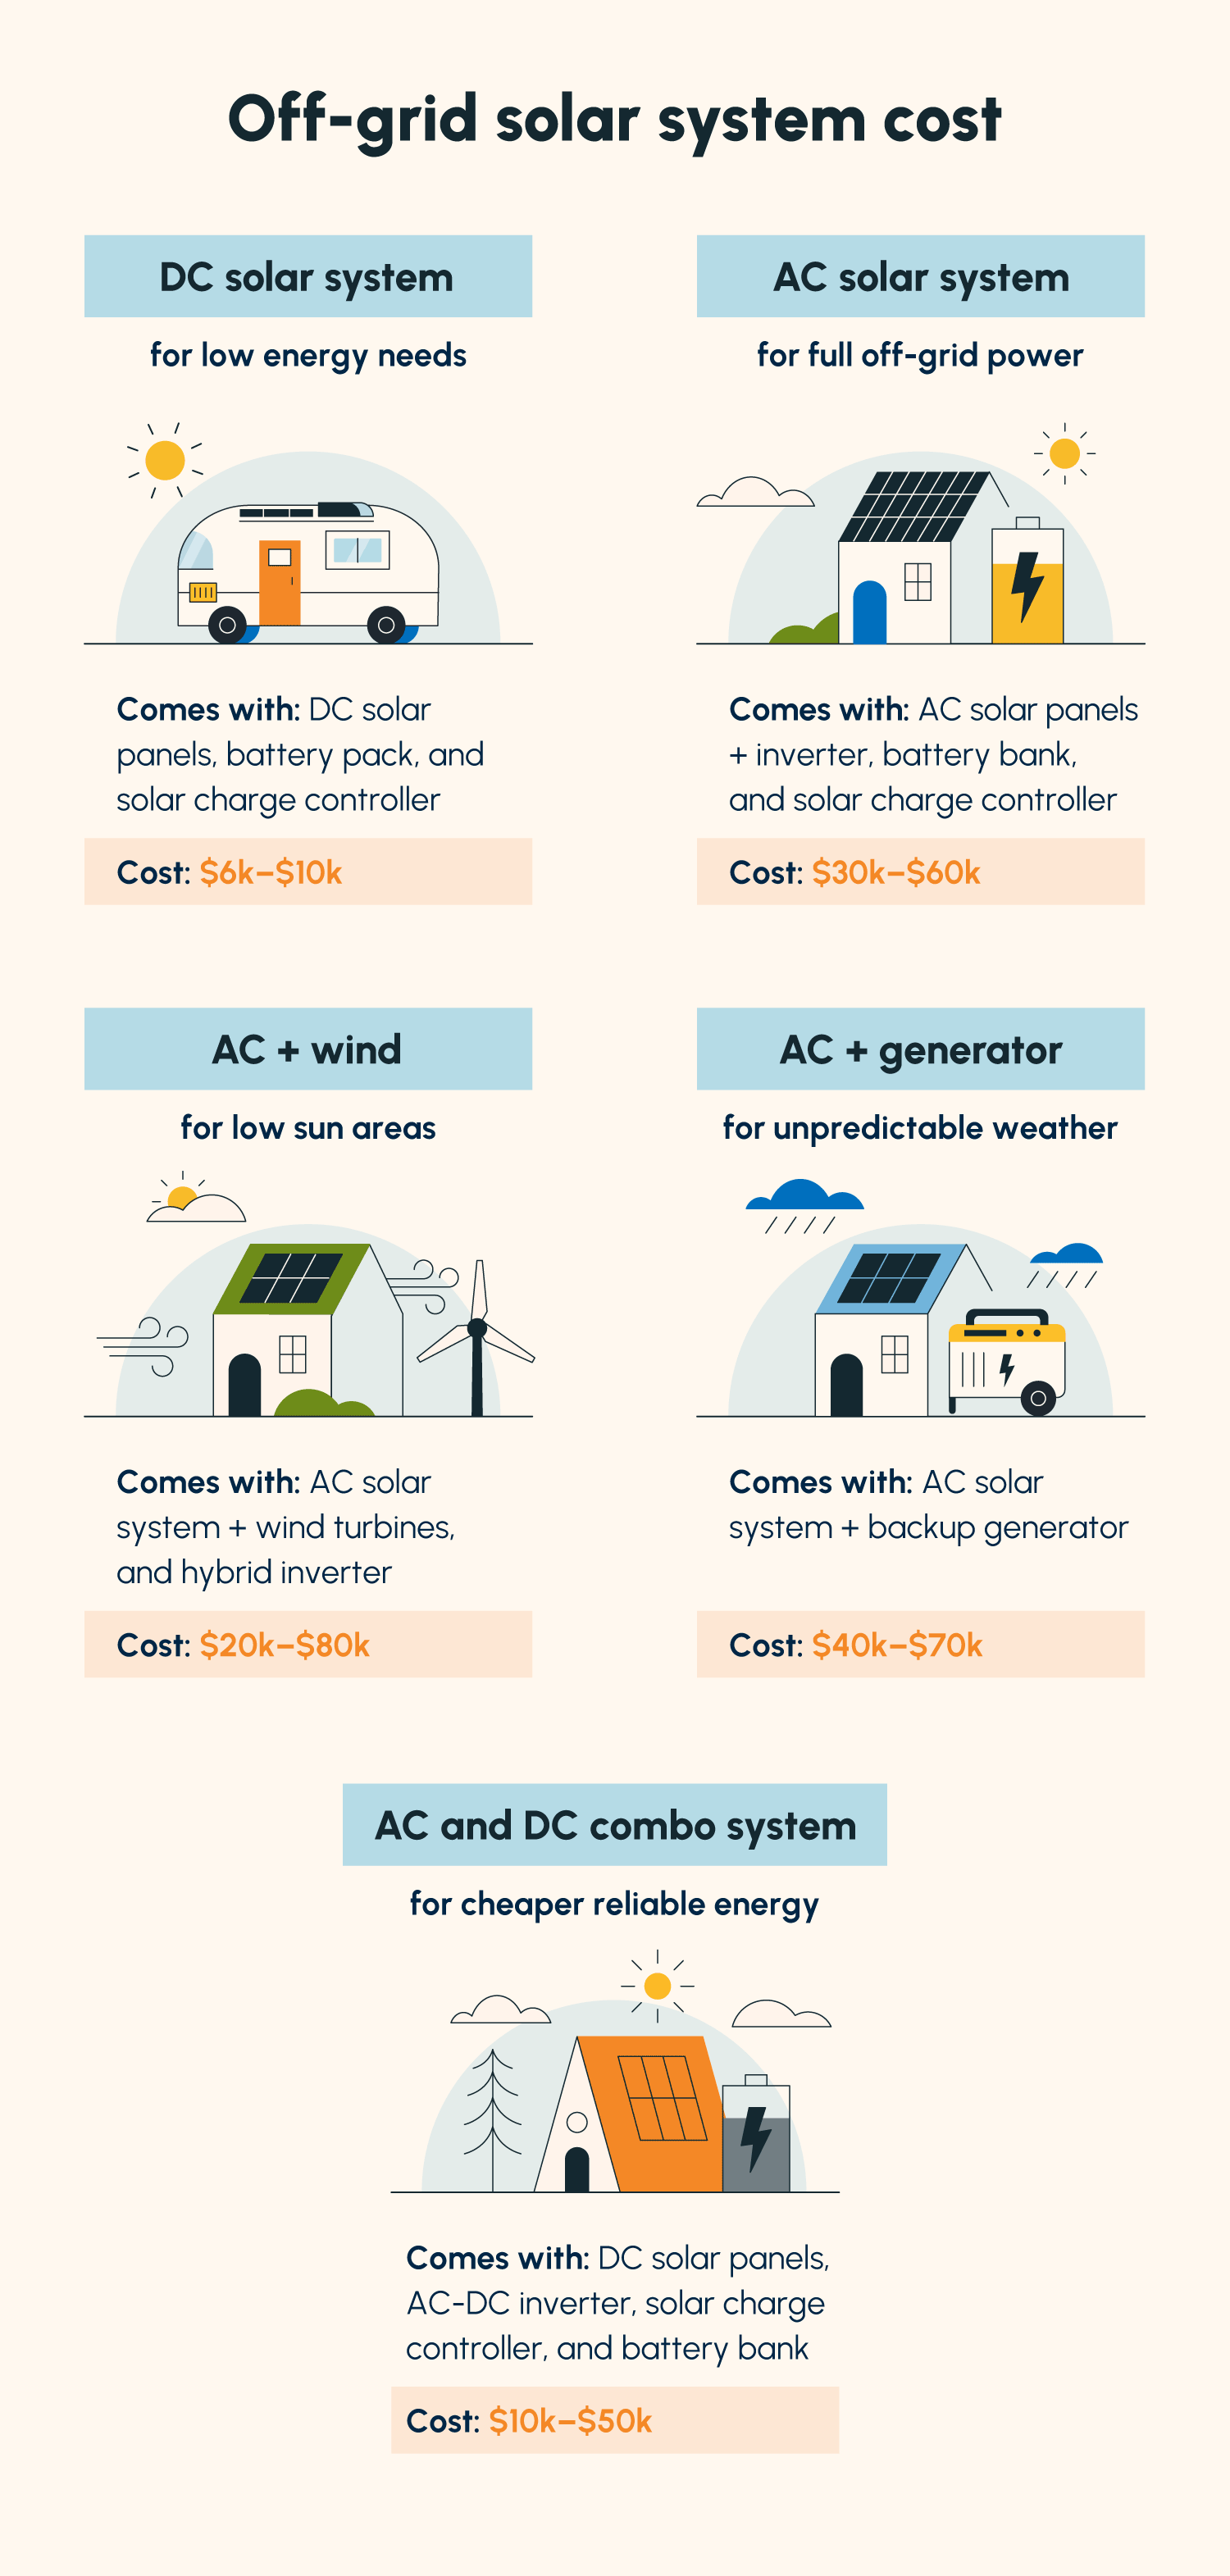 Illustrations demonstrating the cost of various types of off-grid solar system layouts